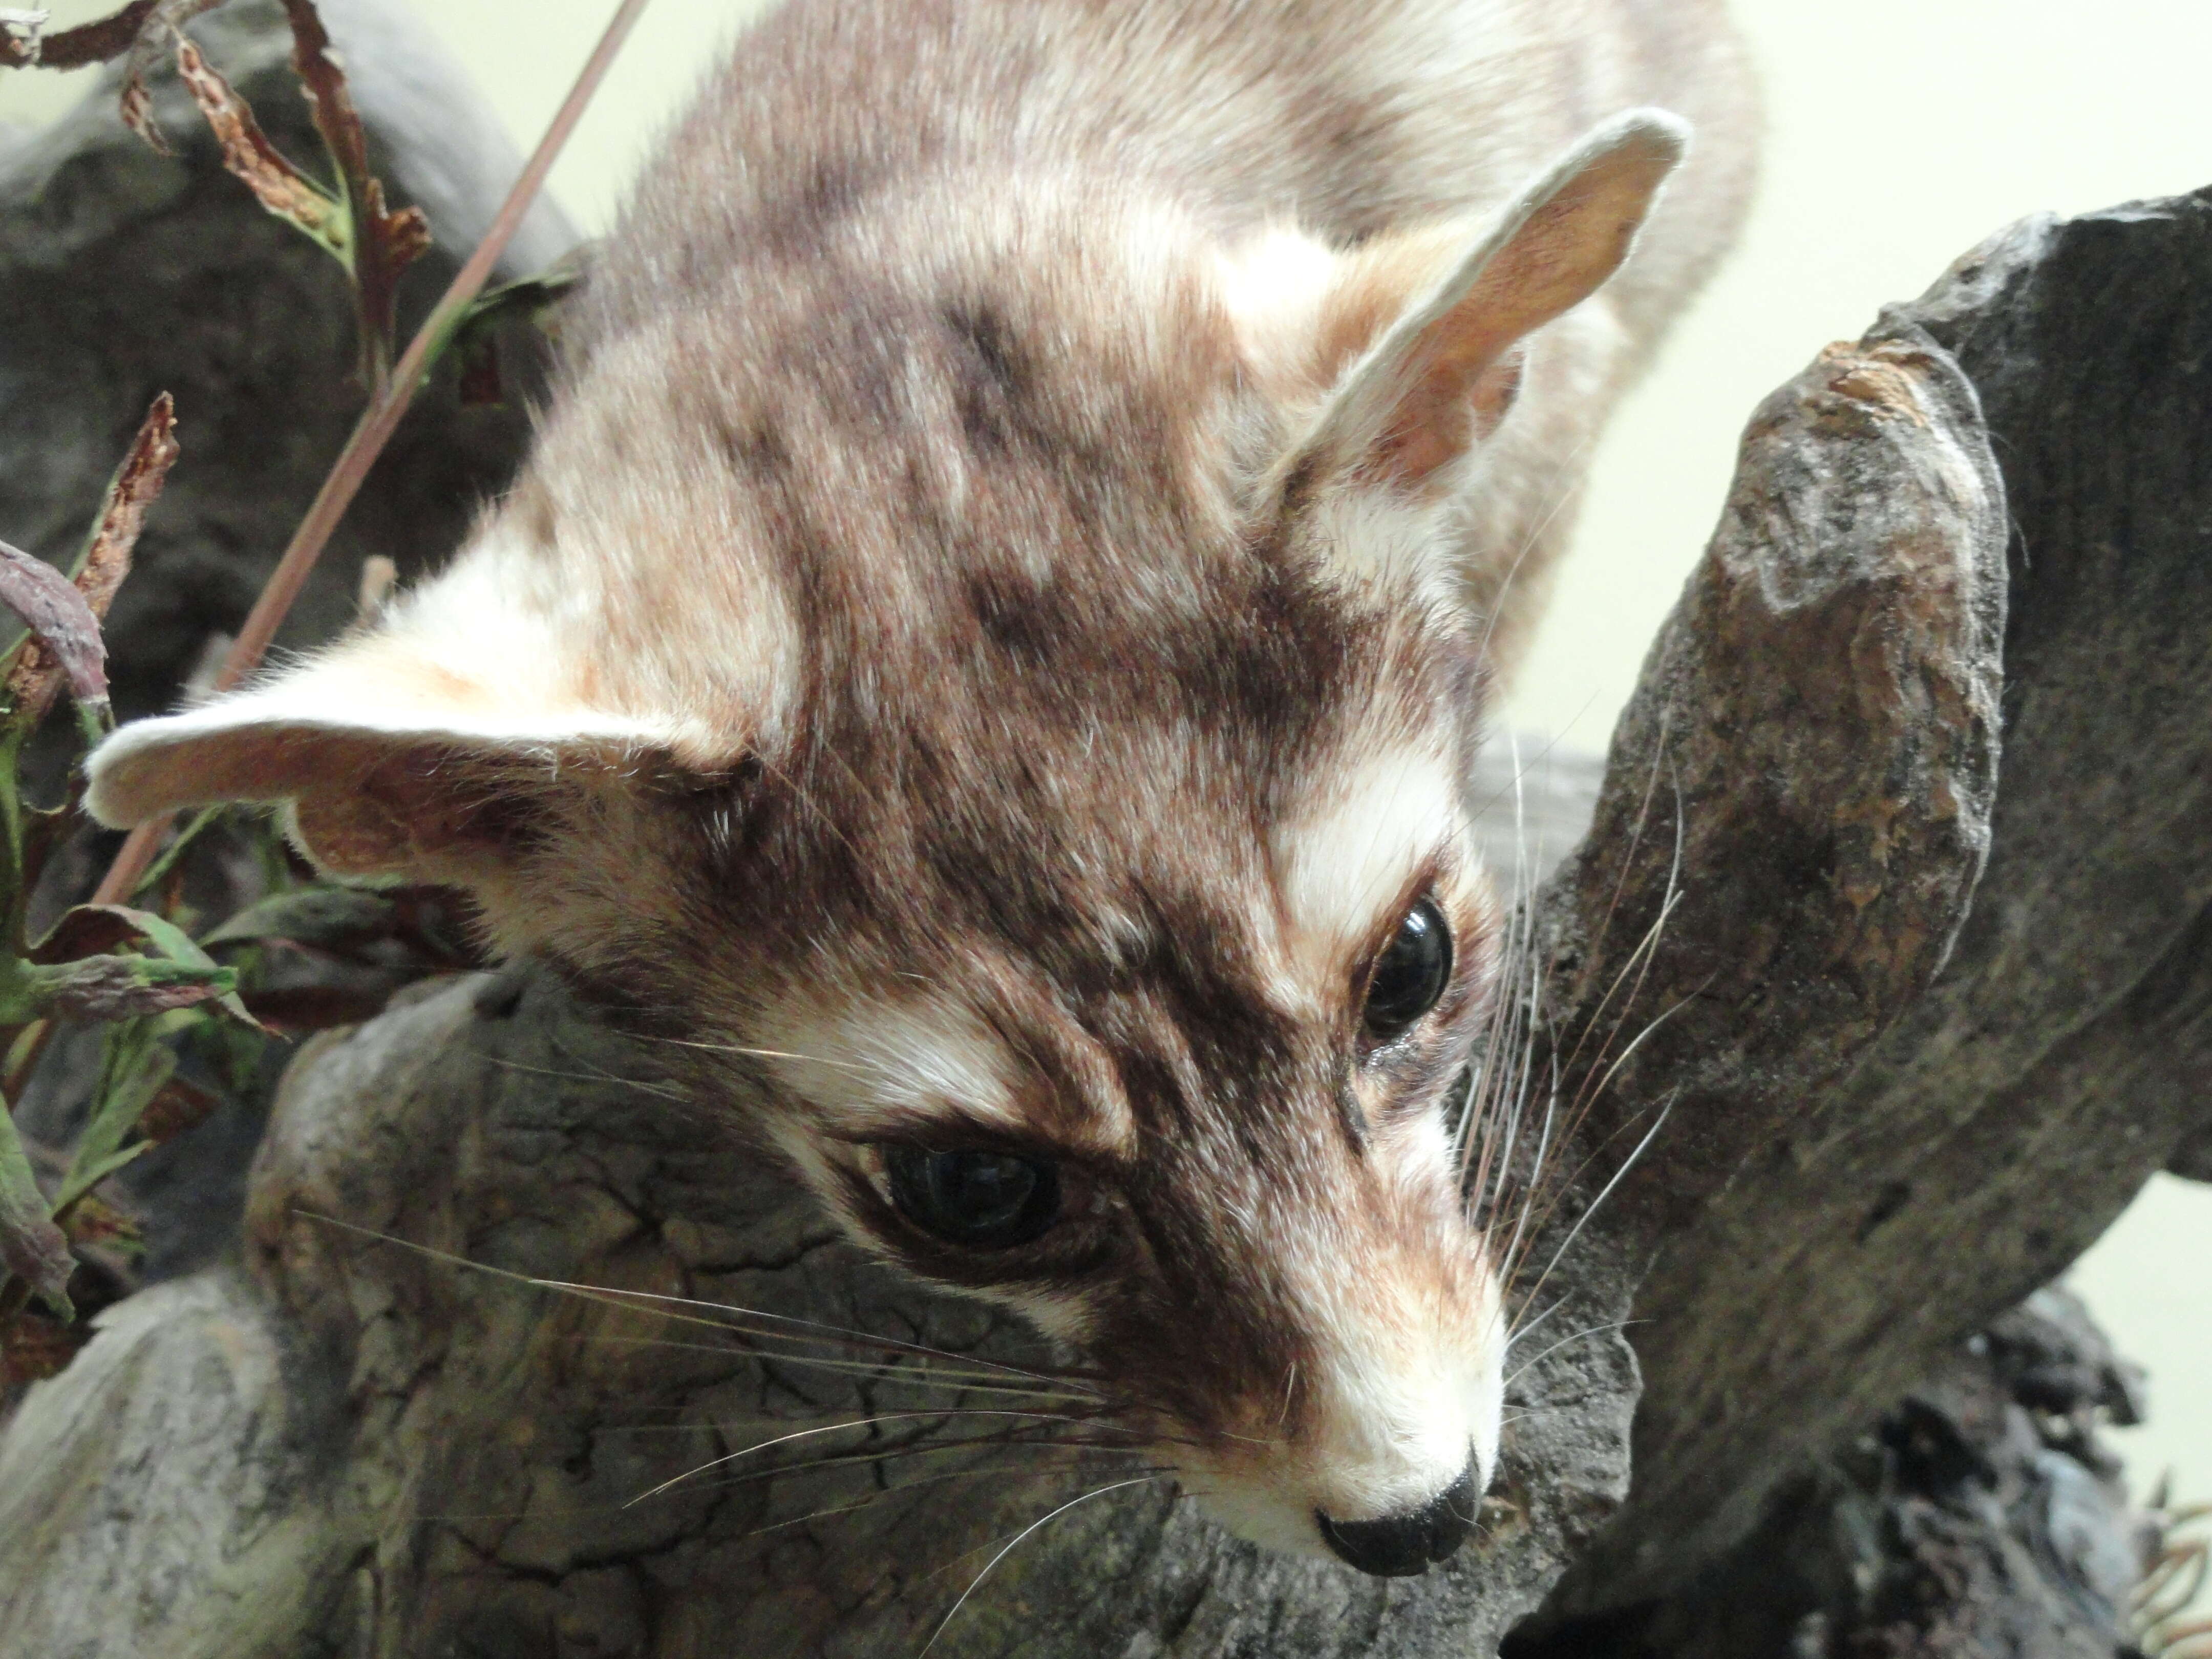 Image of Ringtail